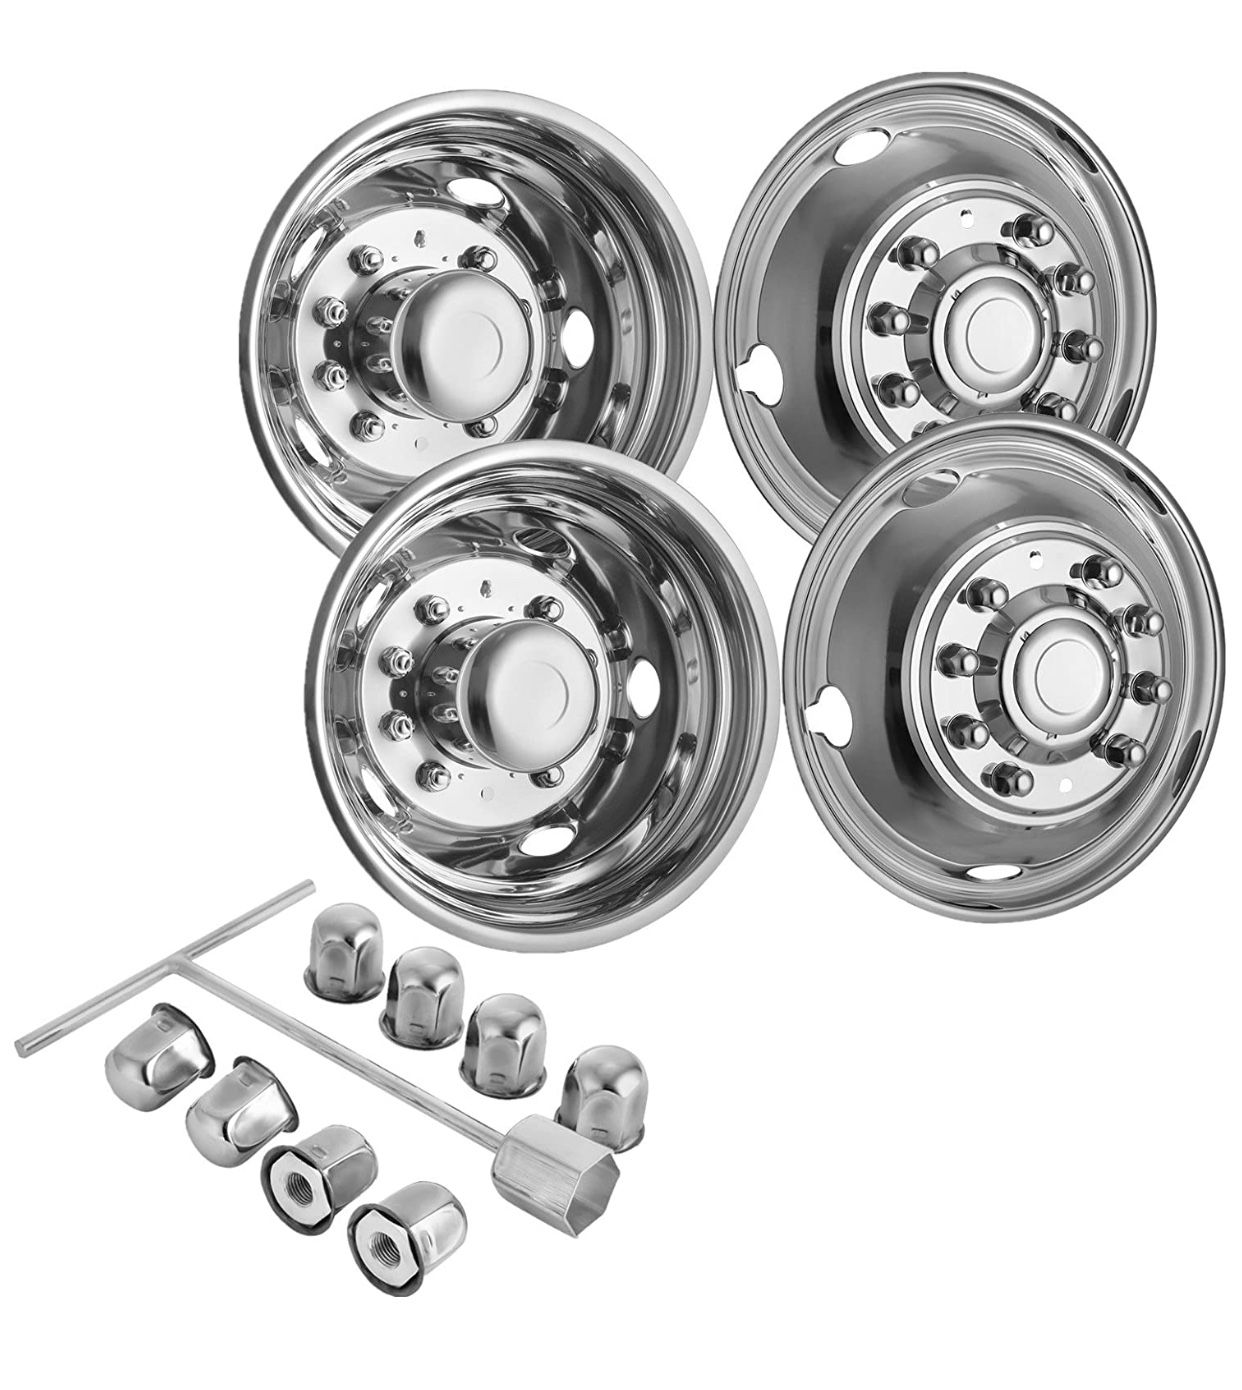 BRAND NEW 4 PCS of Wheel Simulators 19.5 Inch 10 Lug Hubcap Trunk Polished Stainless Steel Bolt On Dually W